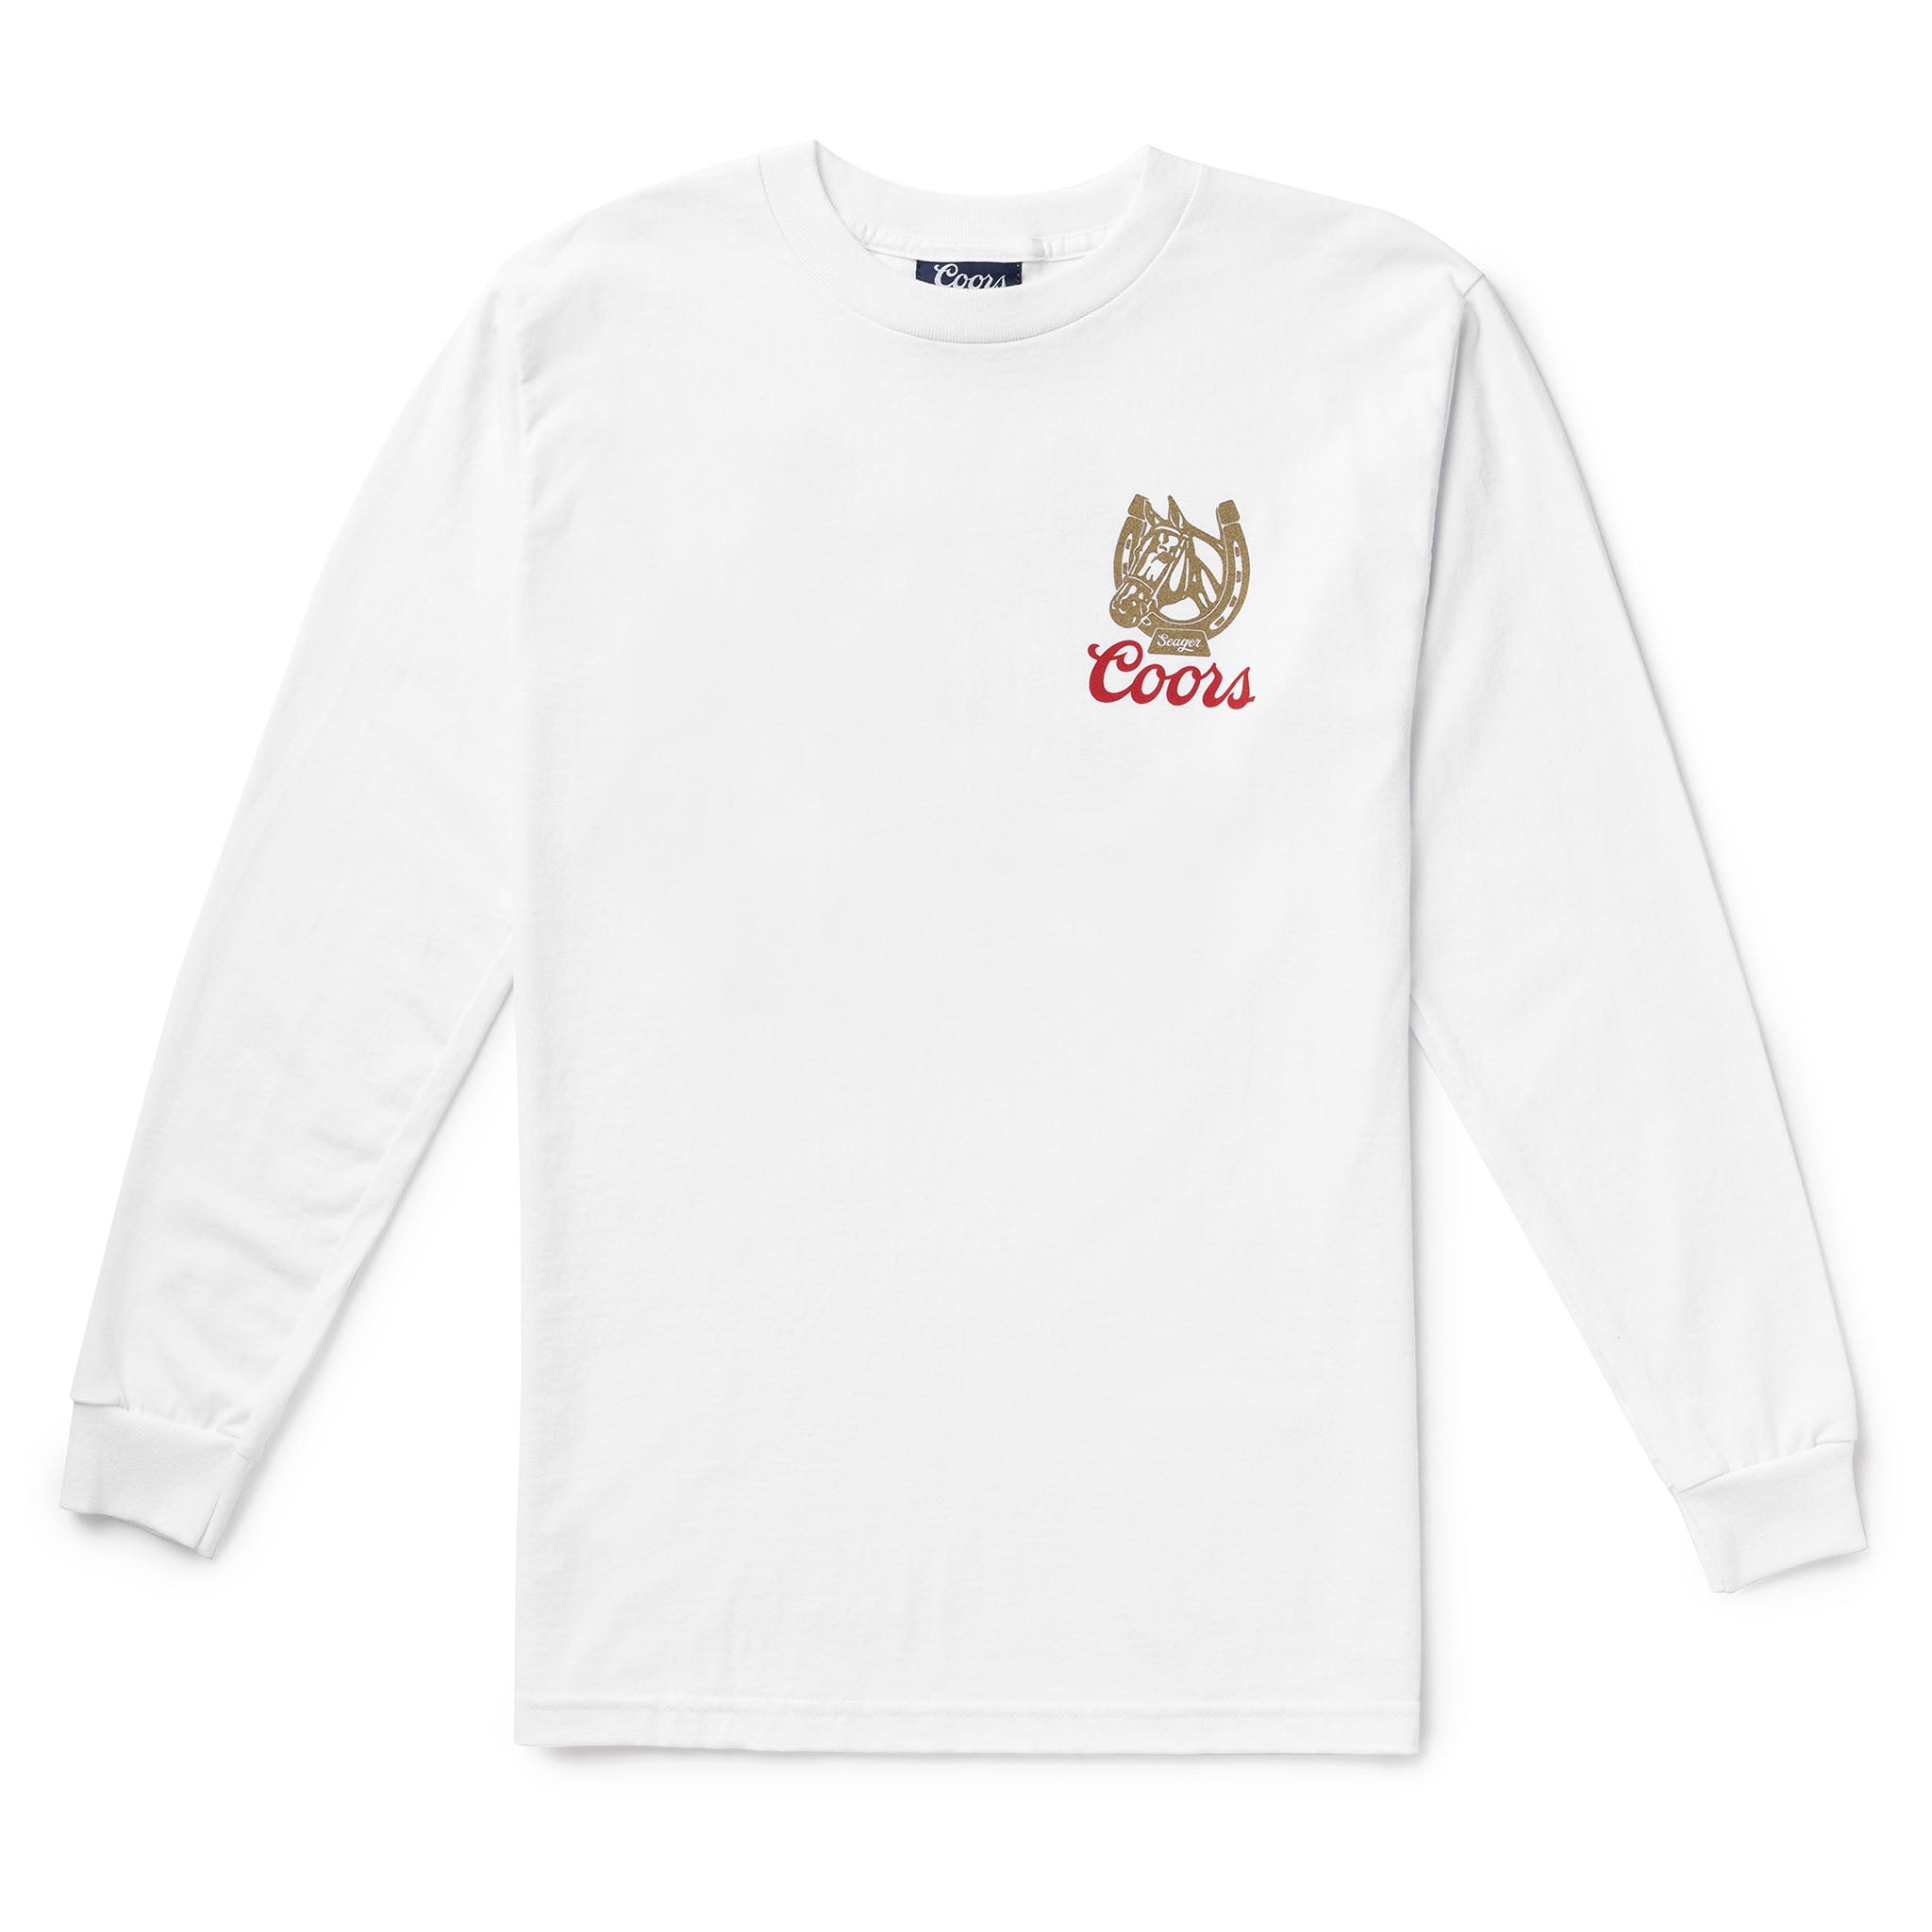 SEAGER X COORS BANQUET LEGACY L/S TEE WHITE